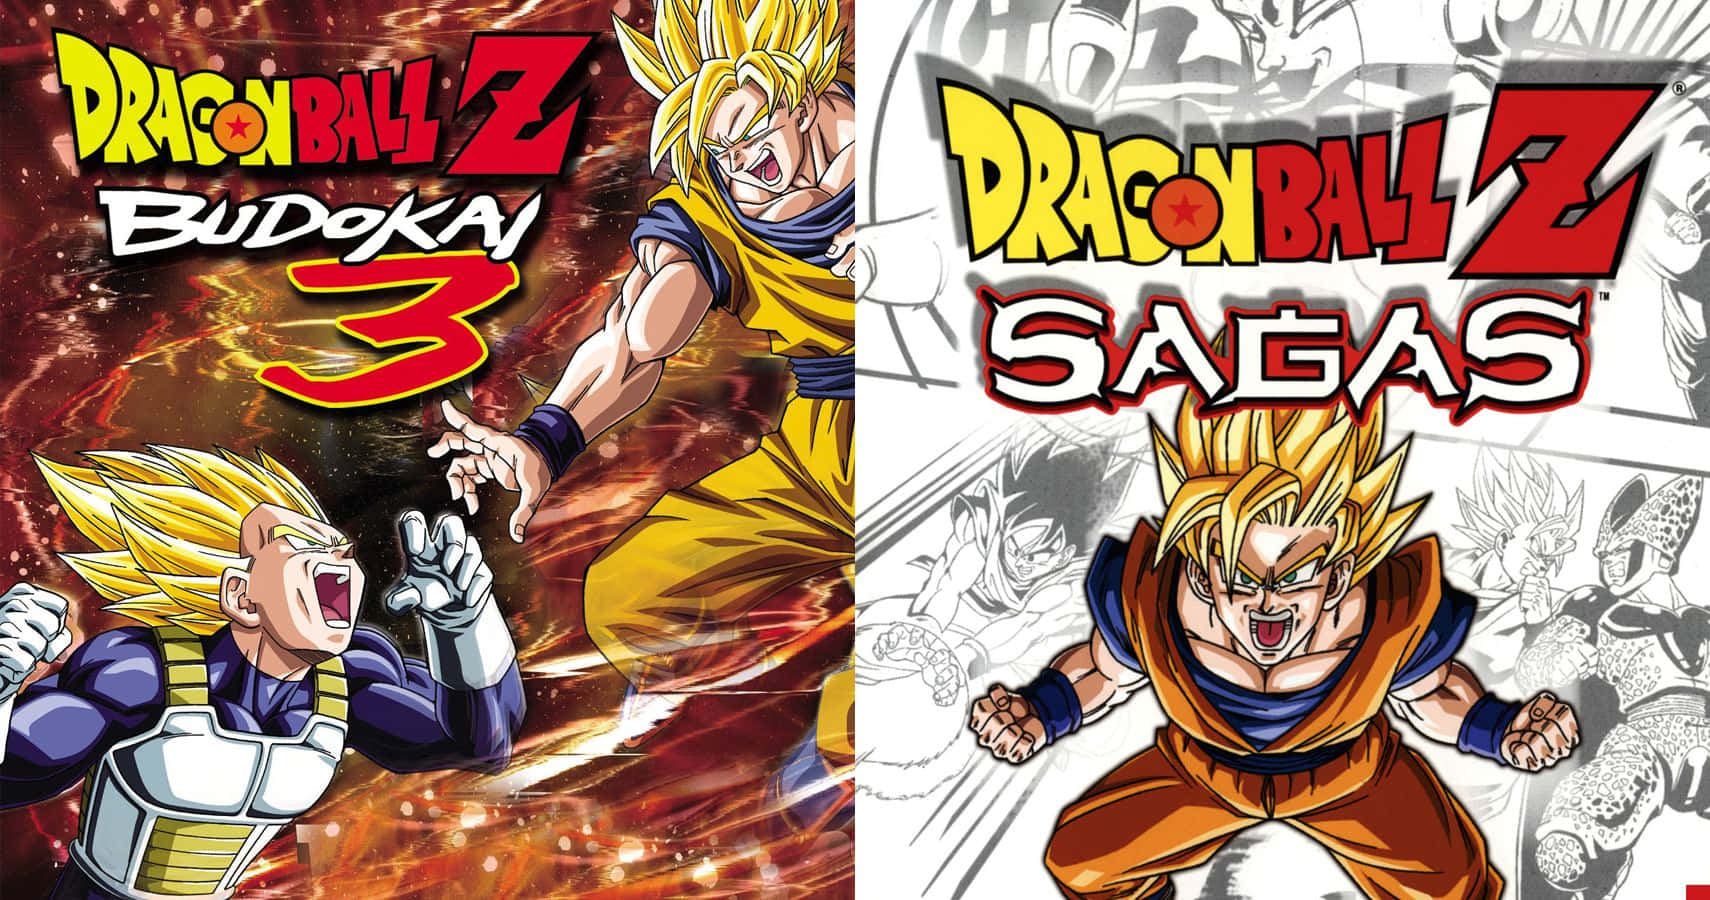 Choose your fighter and join the action in Dragon Ball Z! Wallpaper